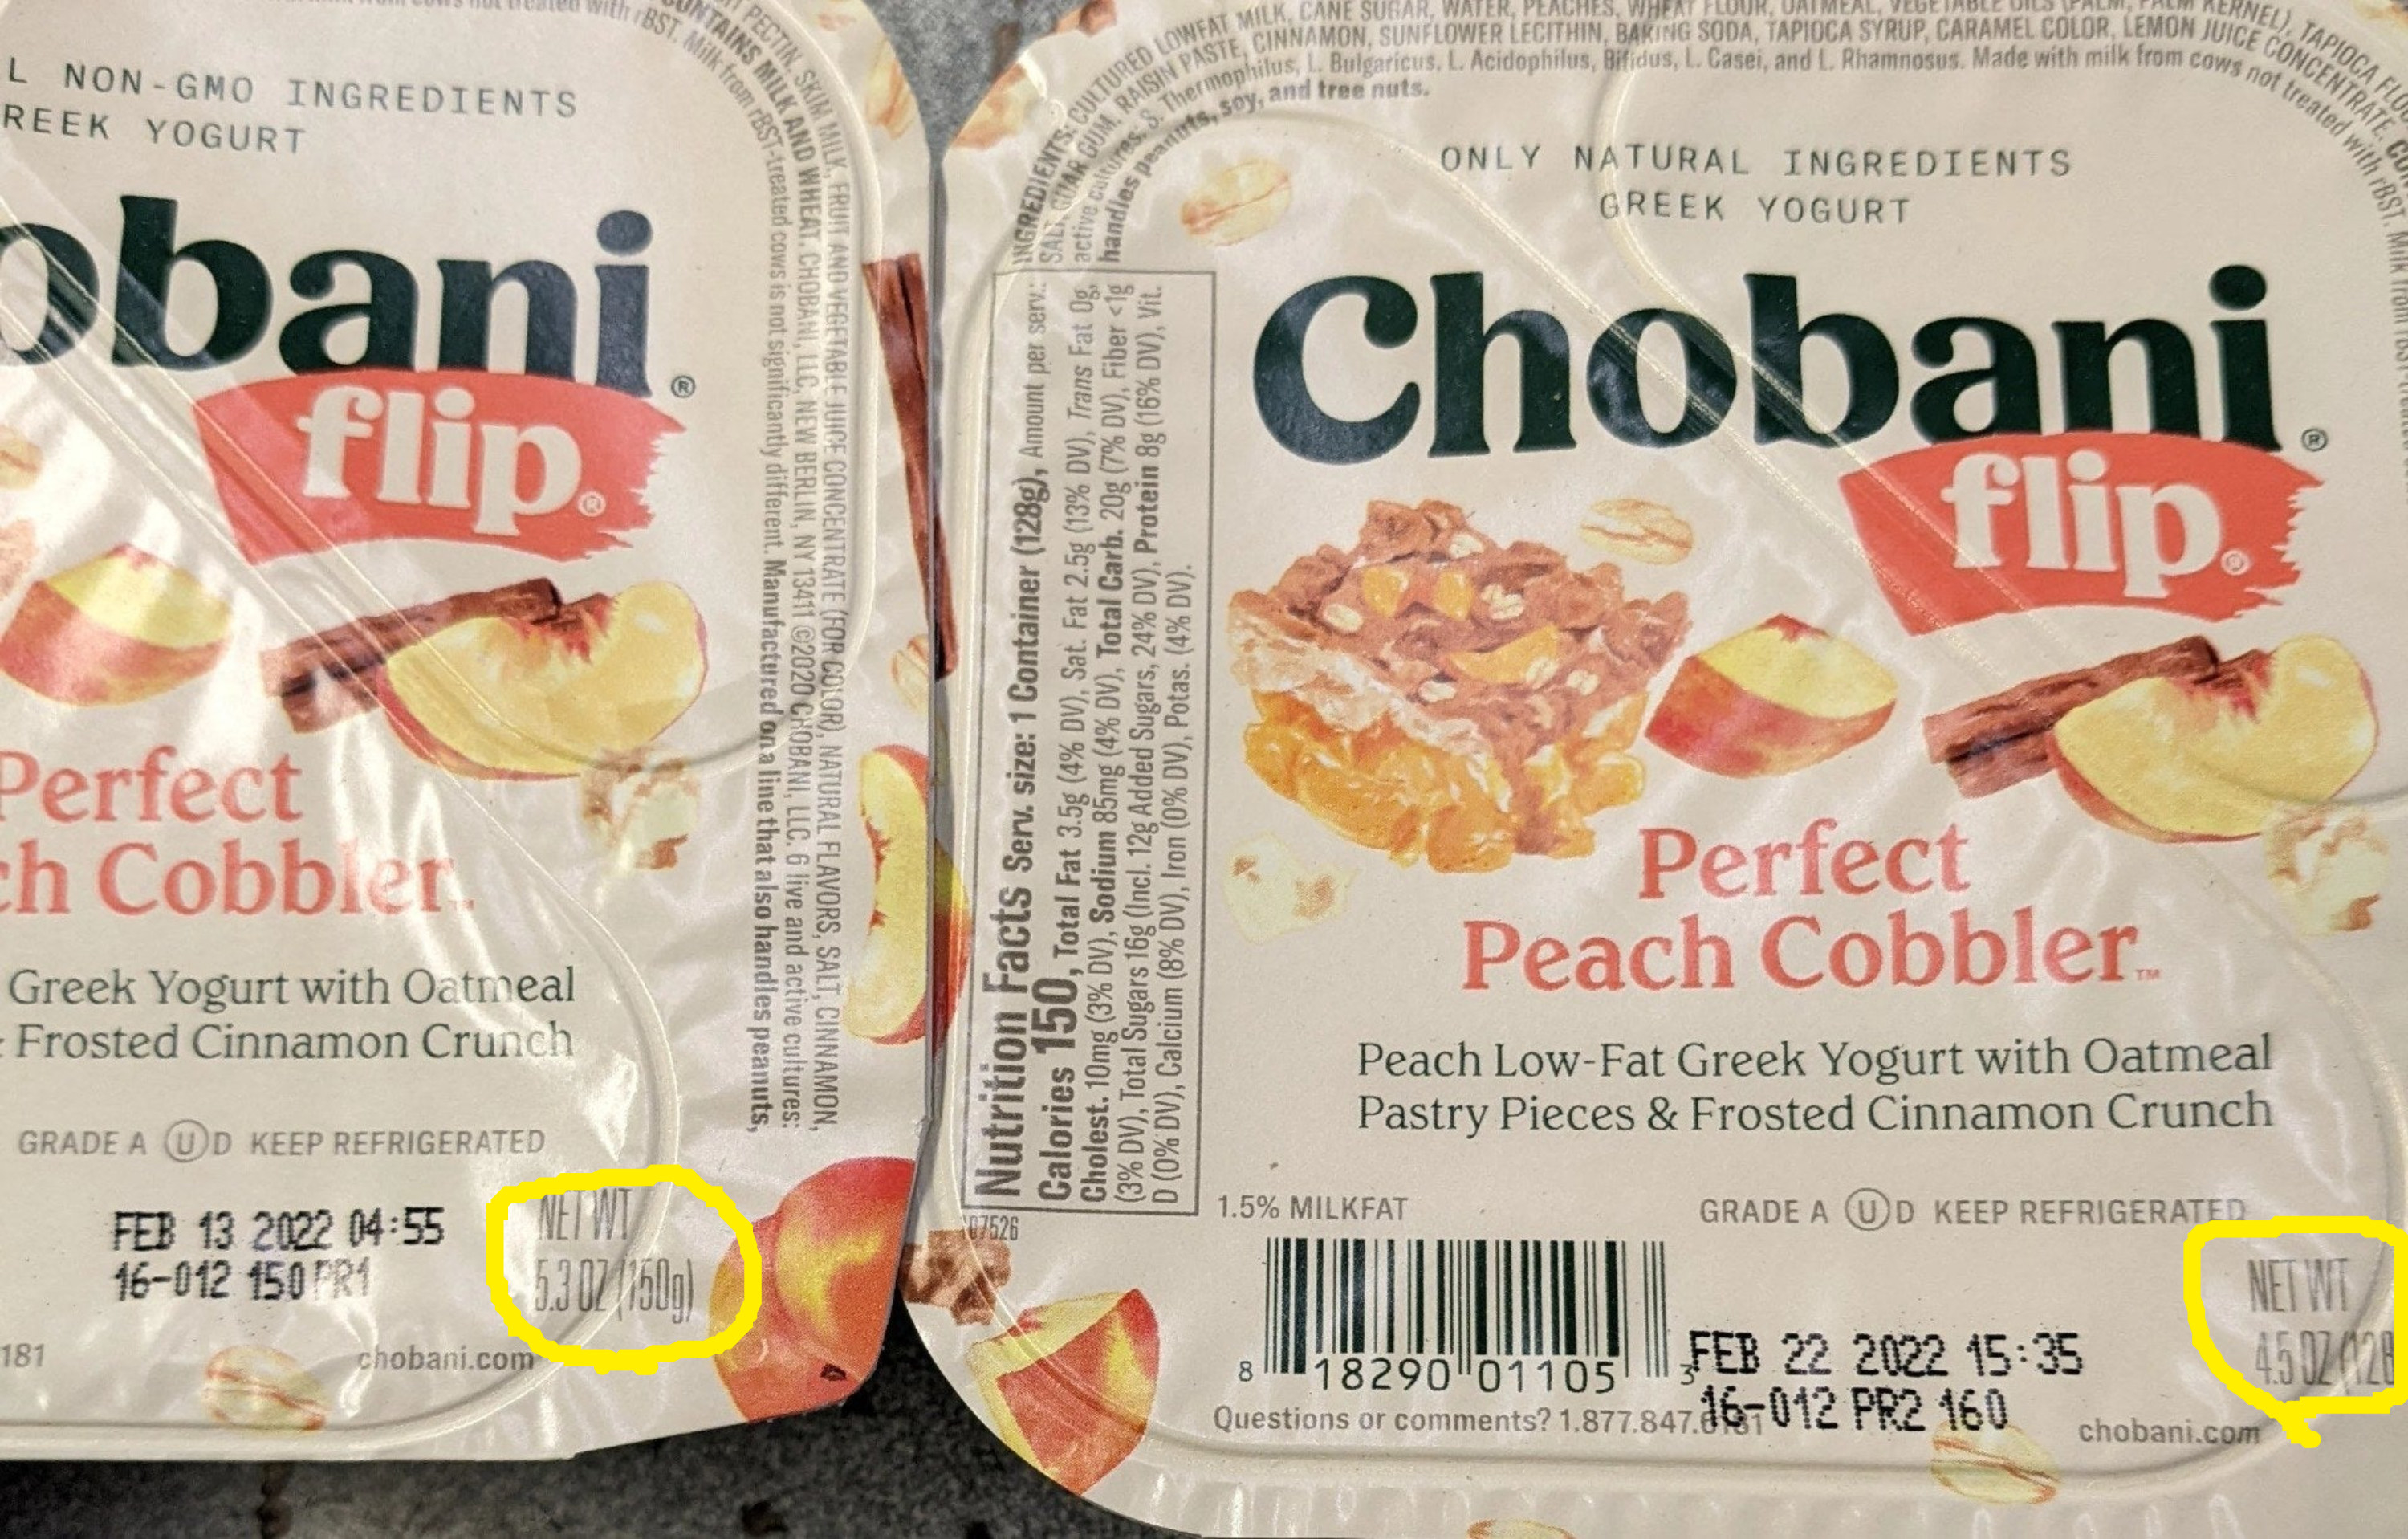 Tiny print on the Chobani yogurt label shows one pack weighs 5.3 ounces while the other weighs 4.5